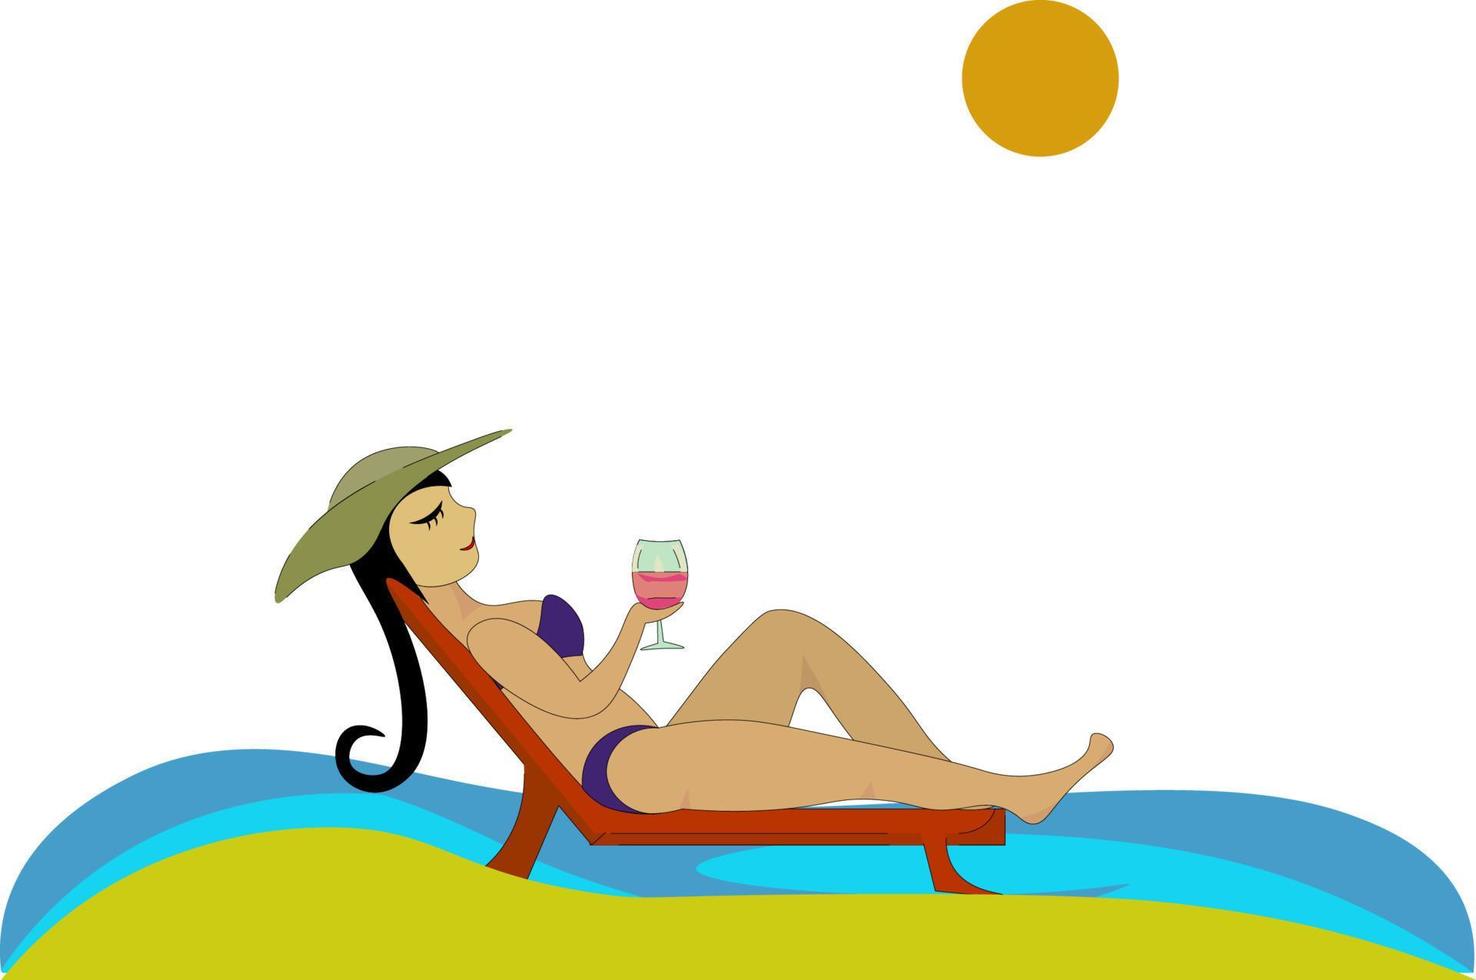 Woman with hat relaxing, illustration, vector on white background.